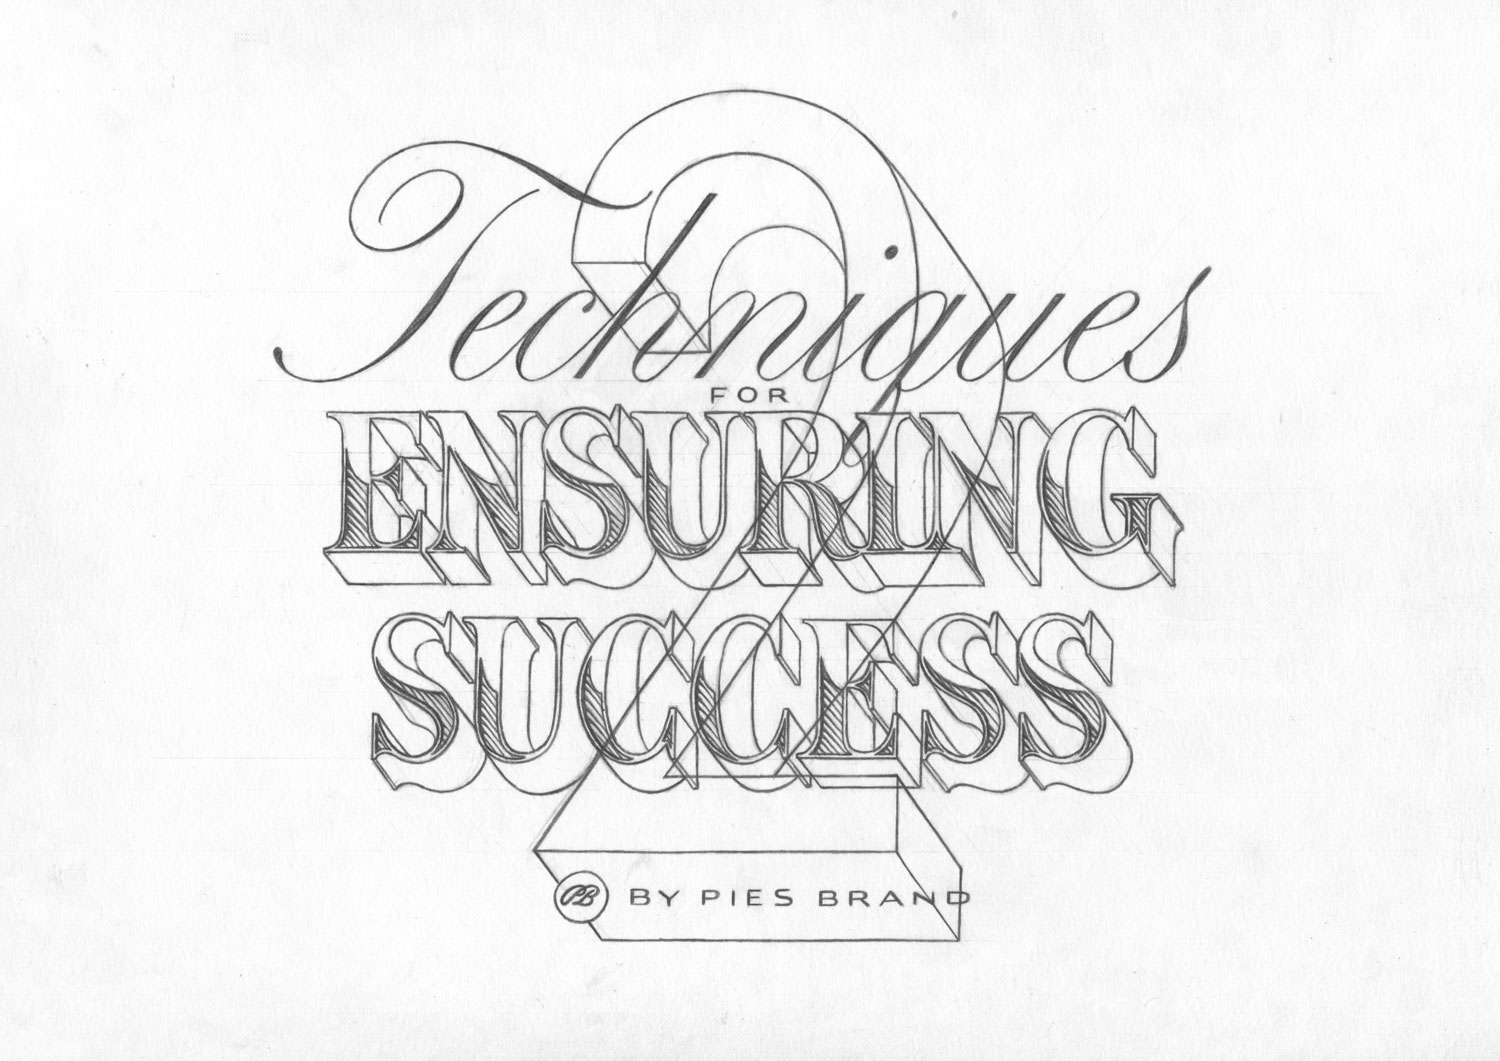 a hand-lettered pencil illustration that reads techniques on ensuring success by pies brand